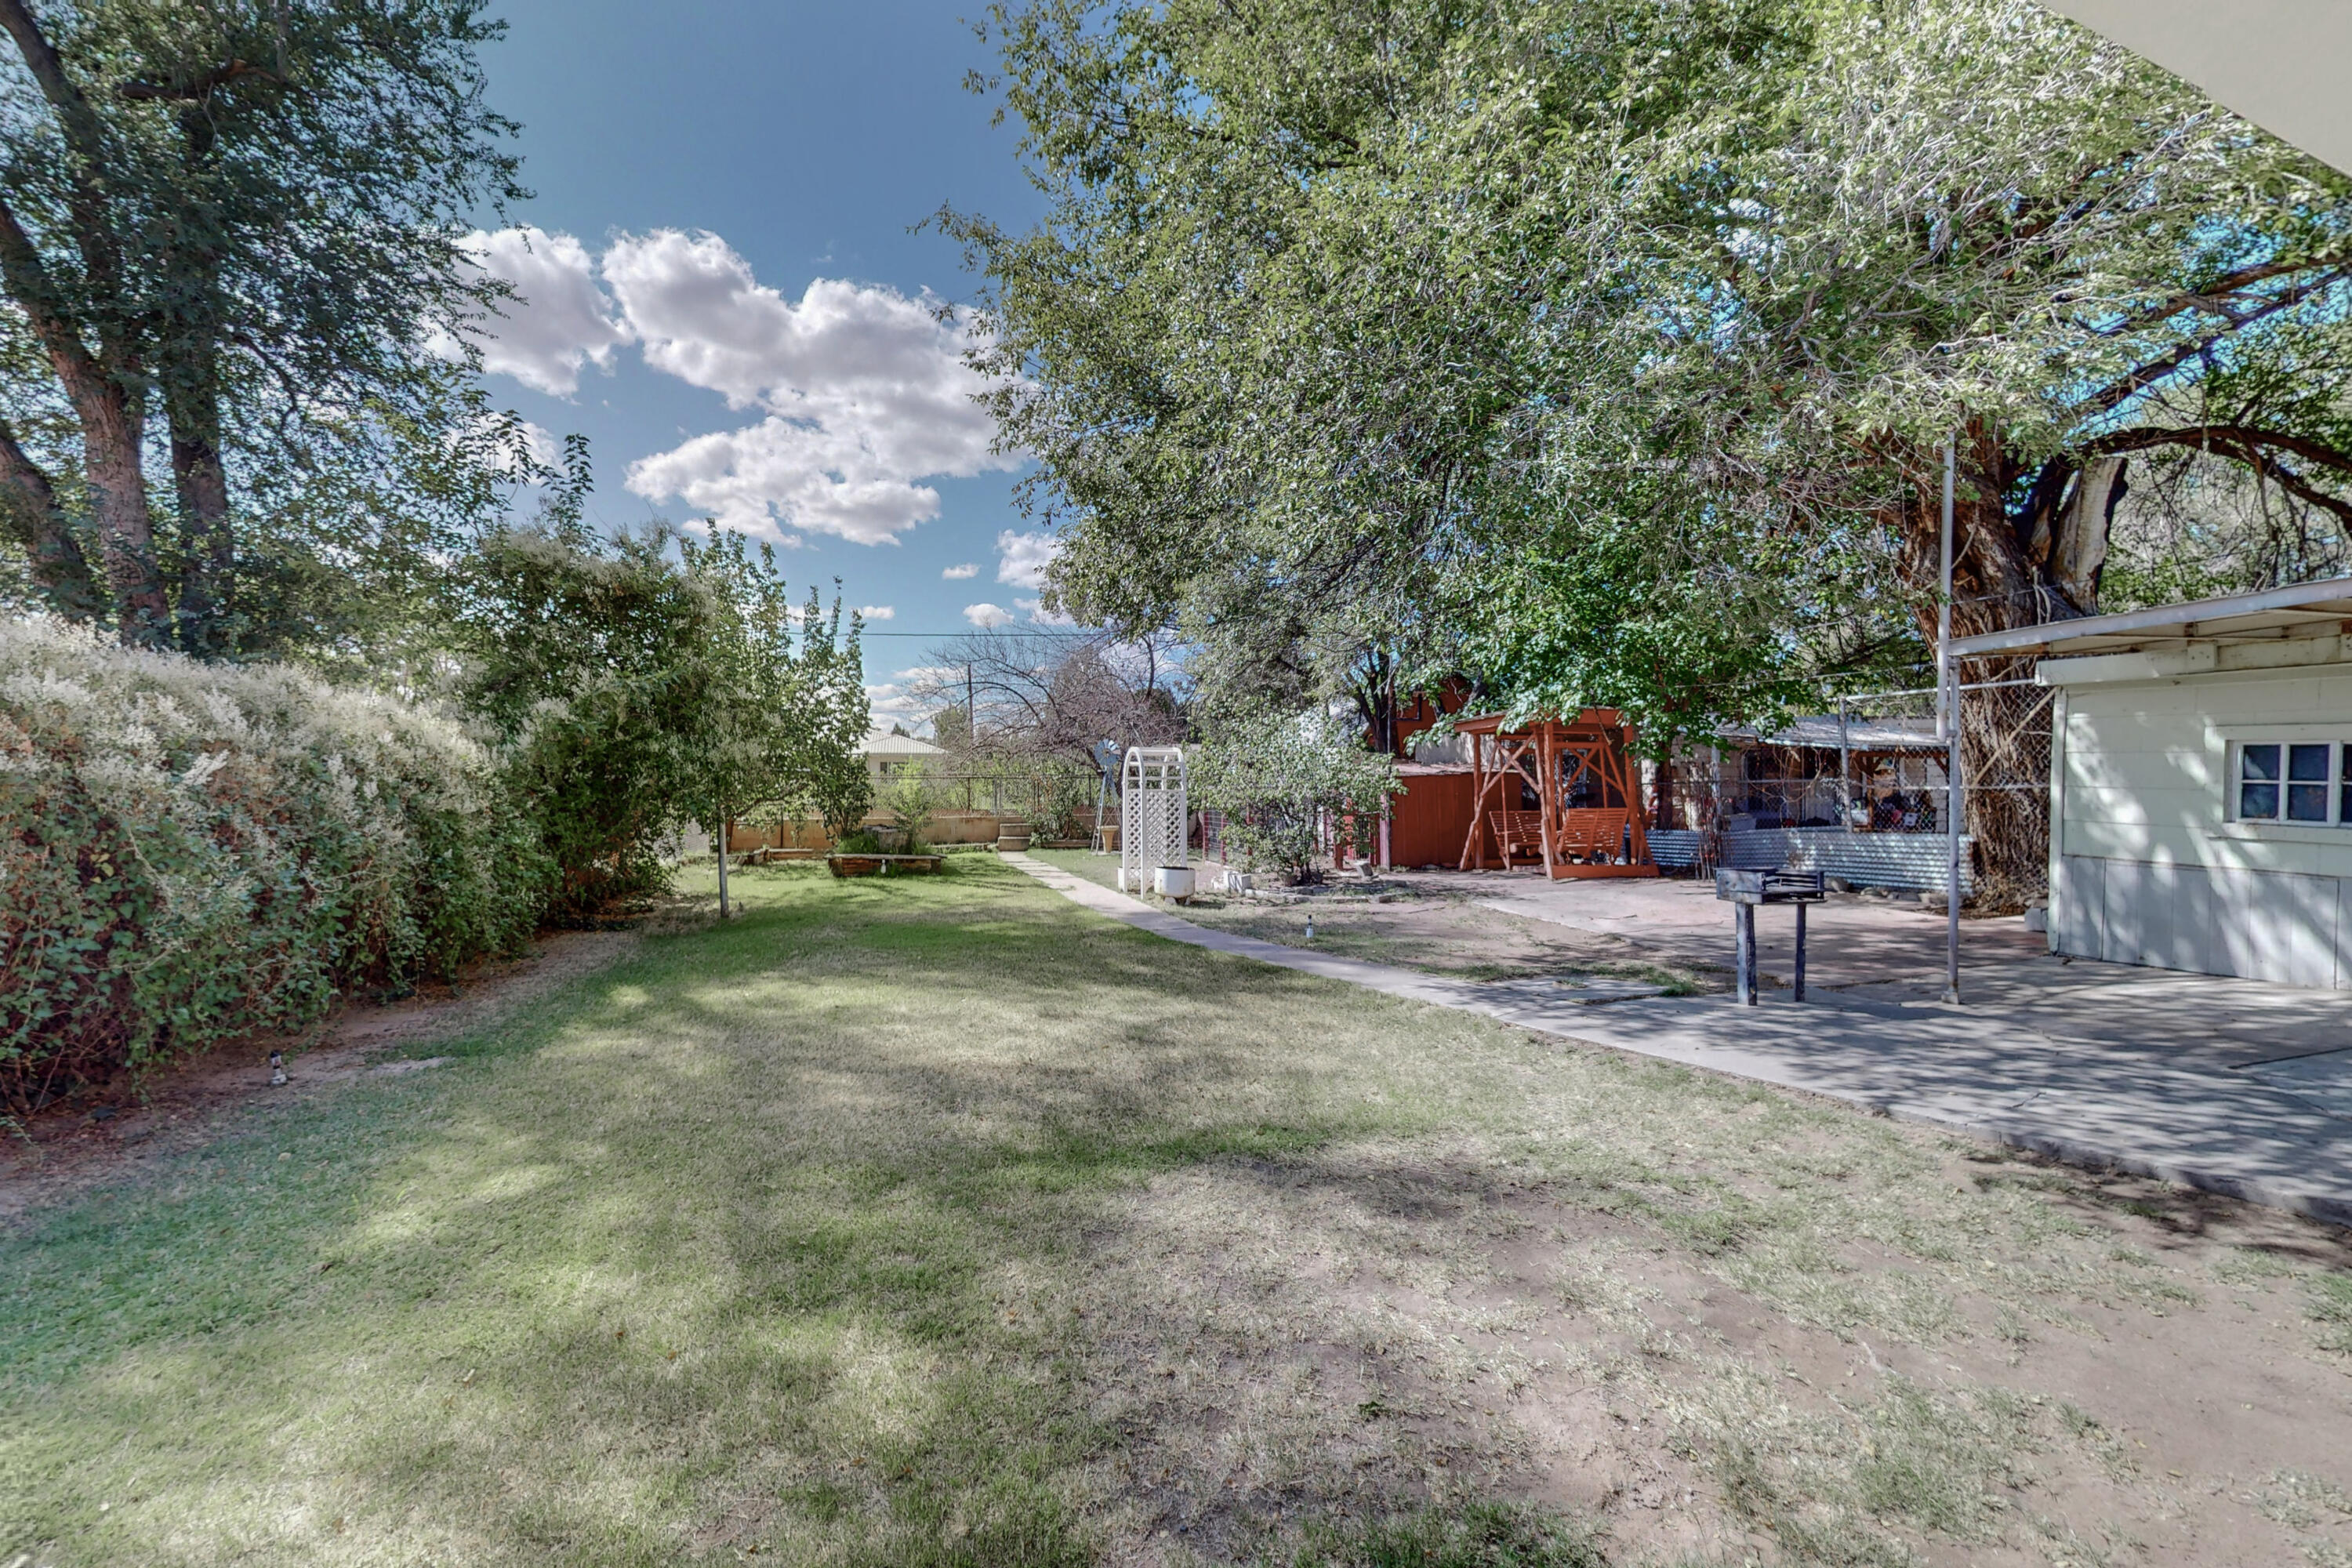 167 Riverside Drive SW, Albuquerque, New Mexico 87105, 3 Bedrooms Bedrooms, ,2 BathroomsBathrooms,Residential,For Sale,167 Riverside Drive SW,1042668